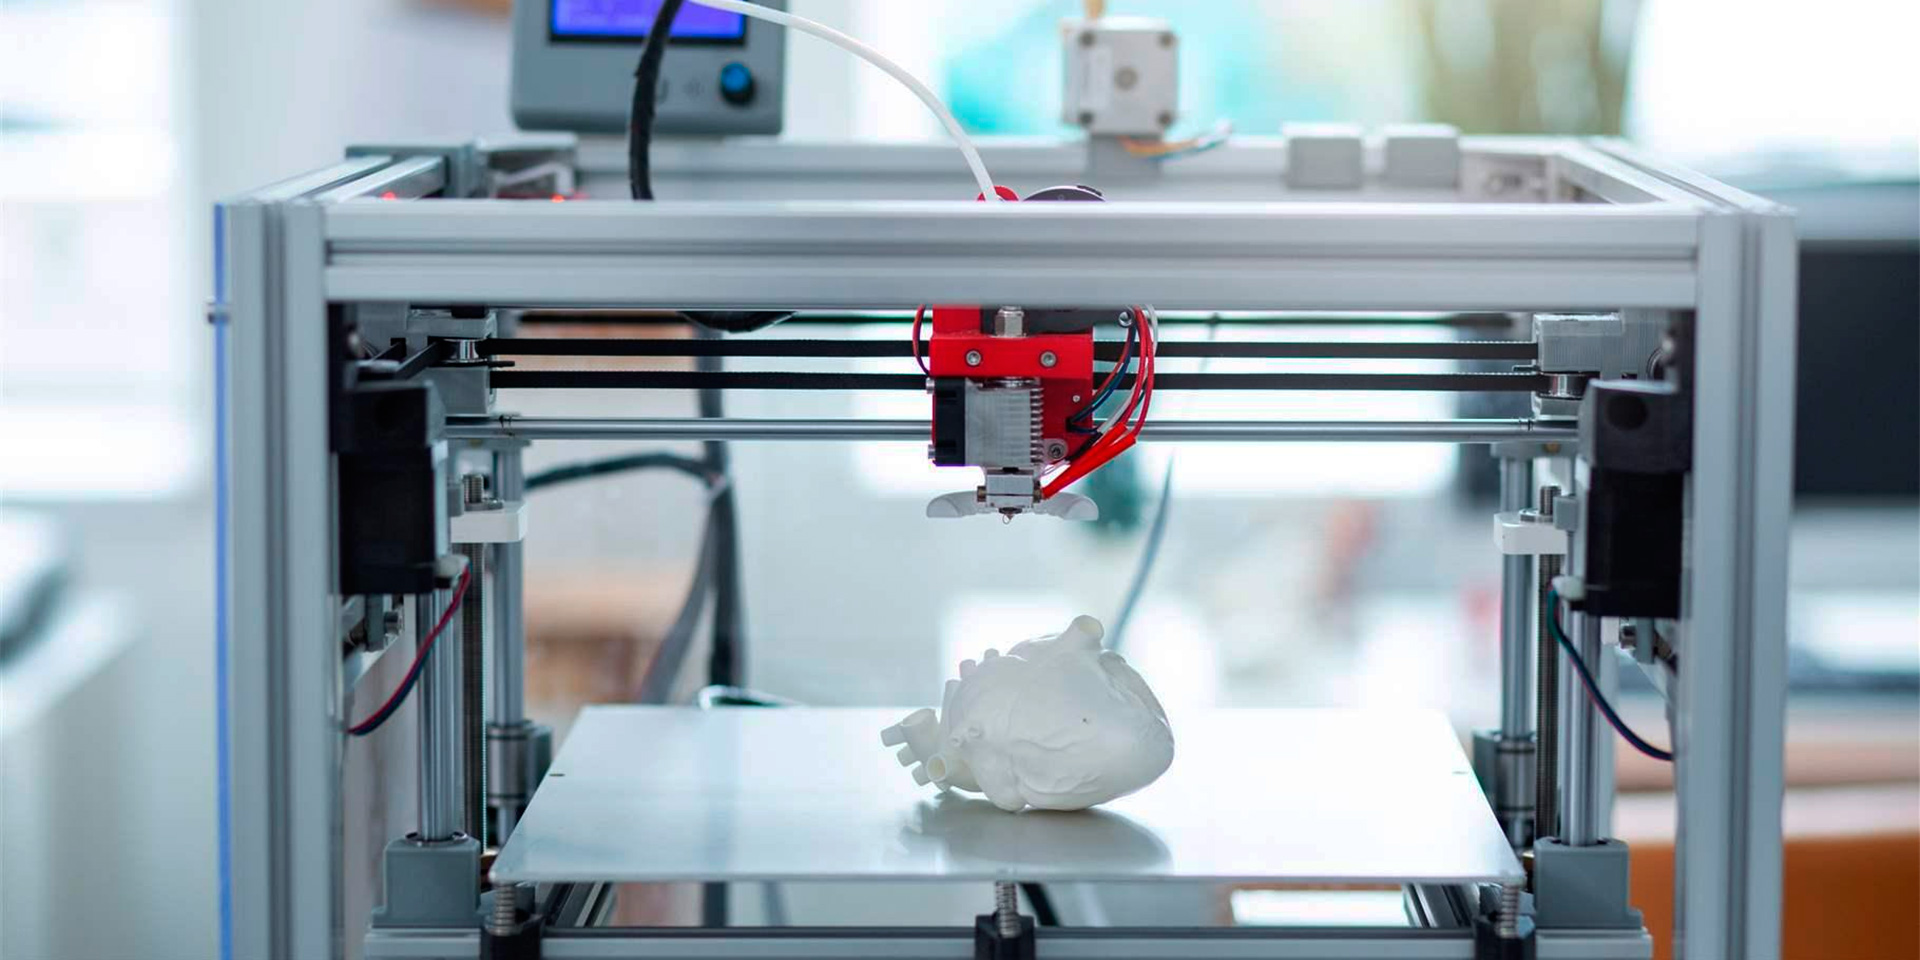 Can Biological Tissues Be Successfully Created With 3D Printing Technology?